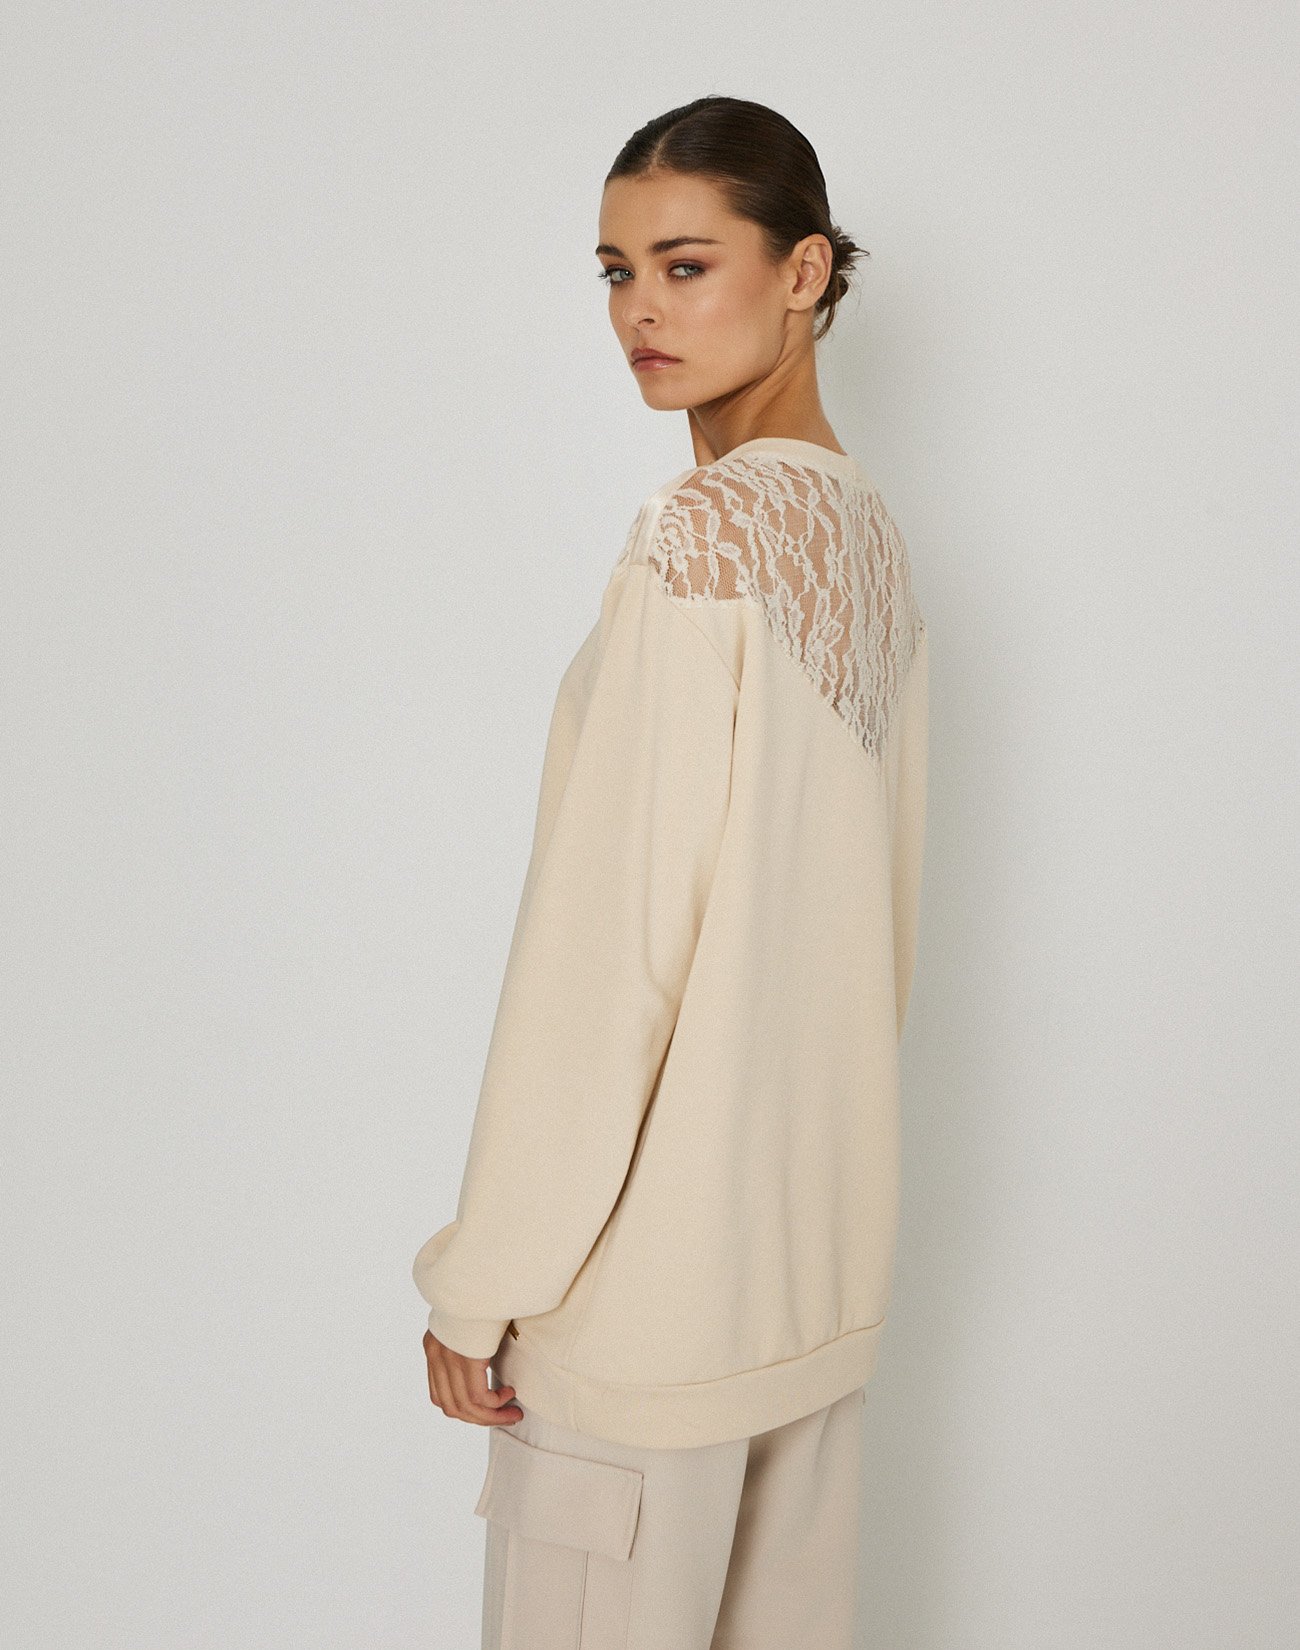 Sweatshirt with lace